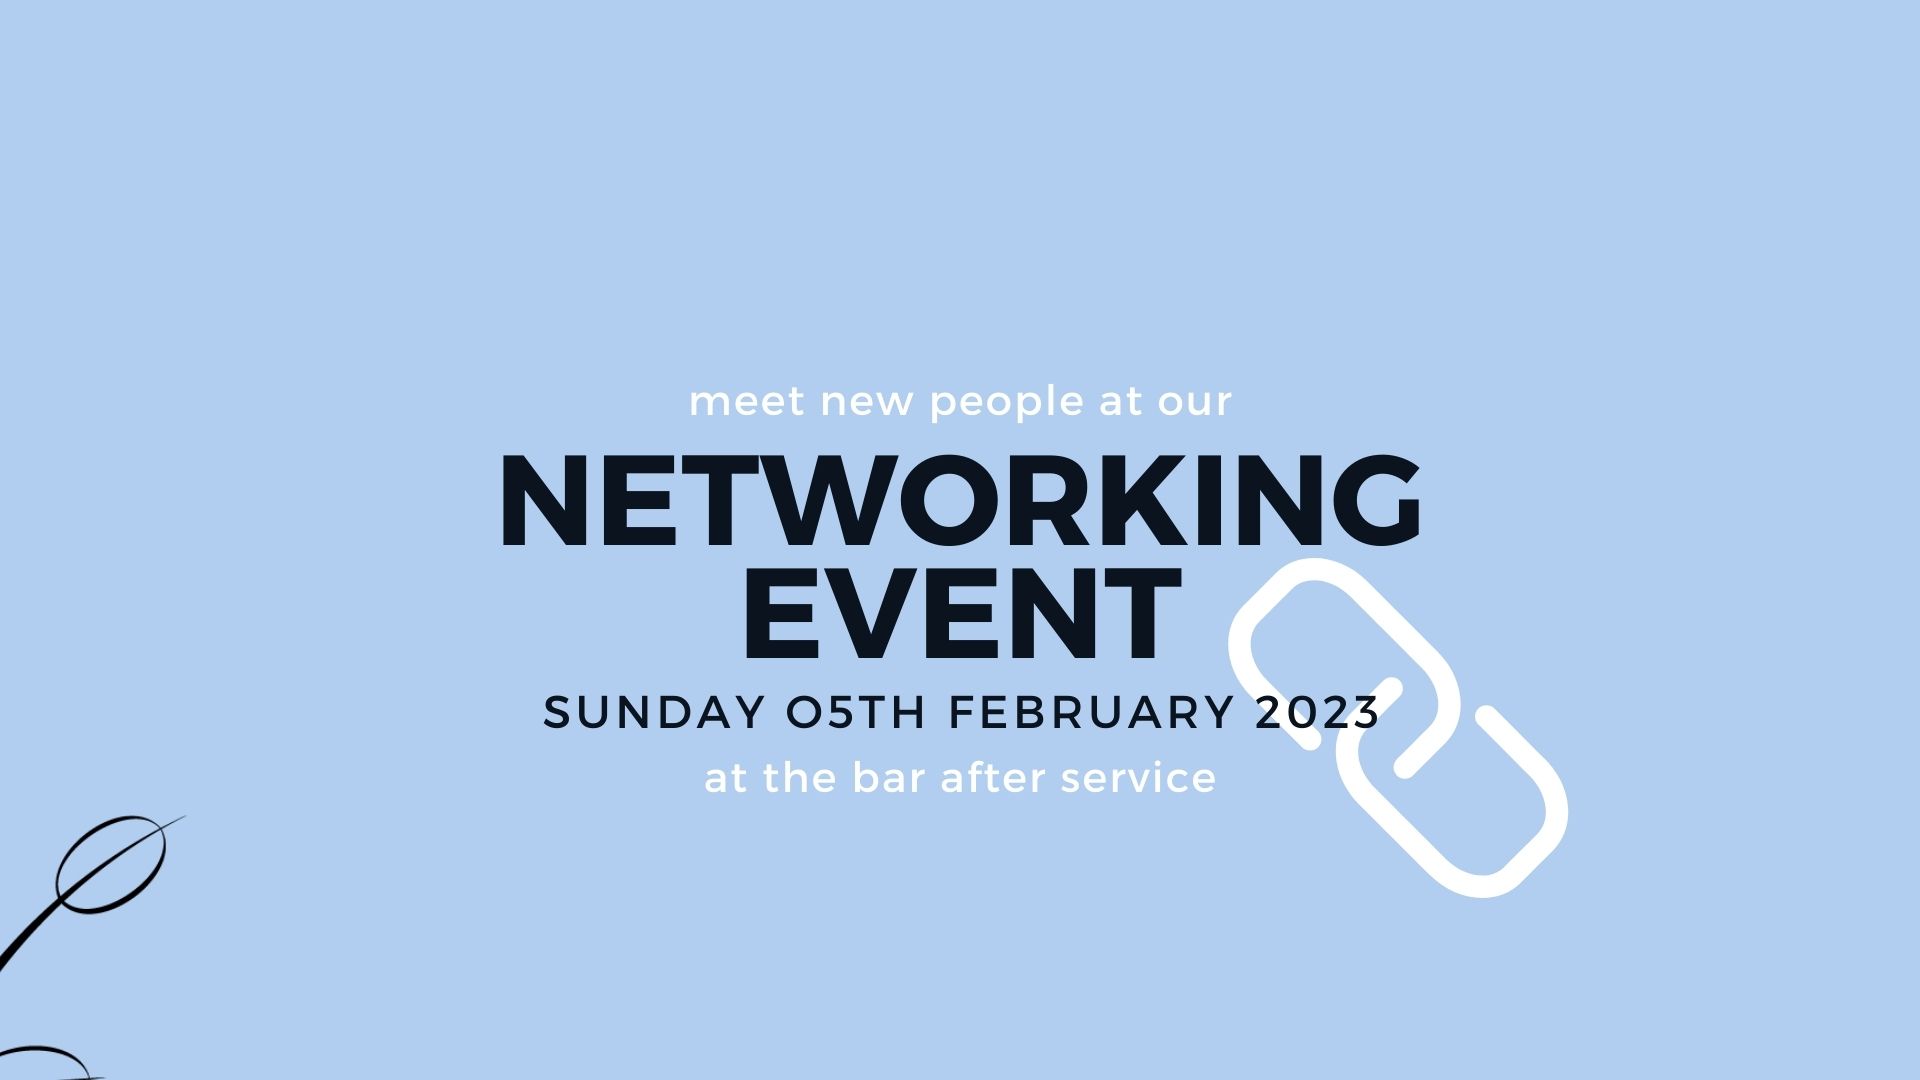 After Service Networking